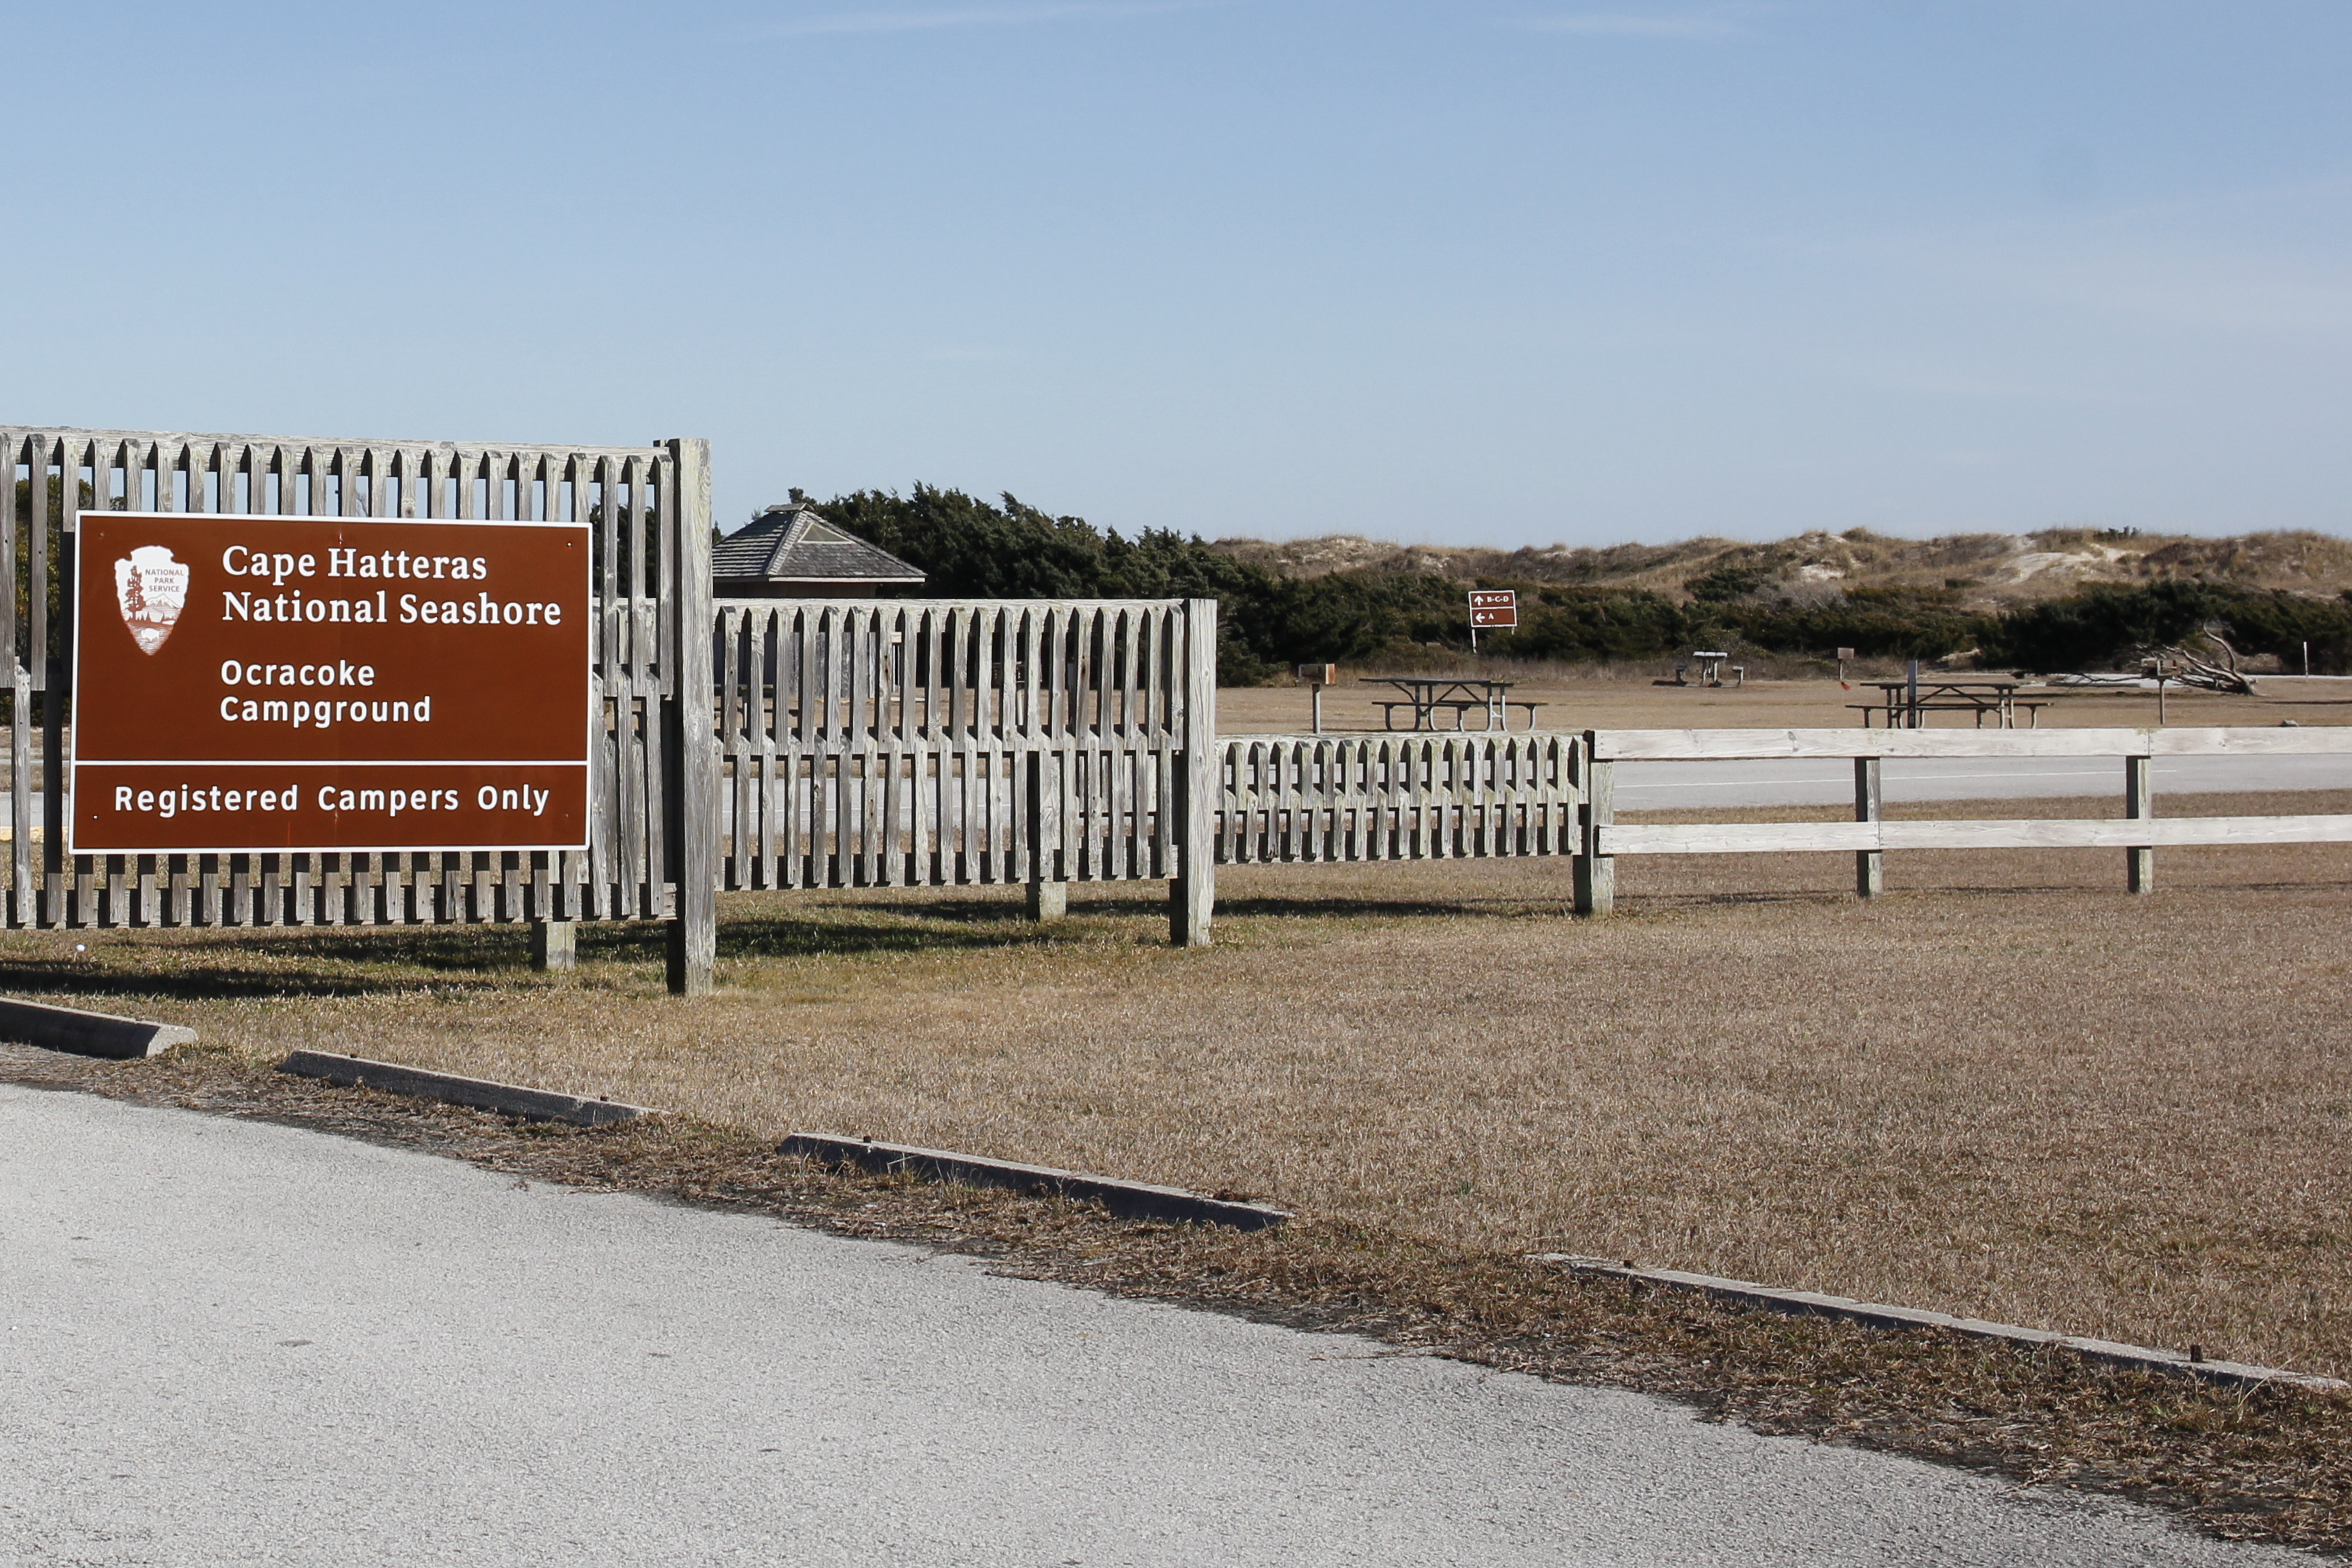 Brown entrance sign and wooden fence at Ocracoke Campground.